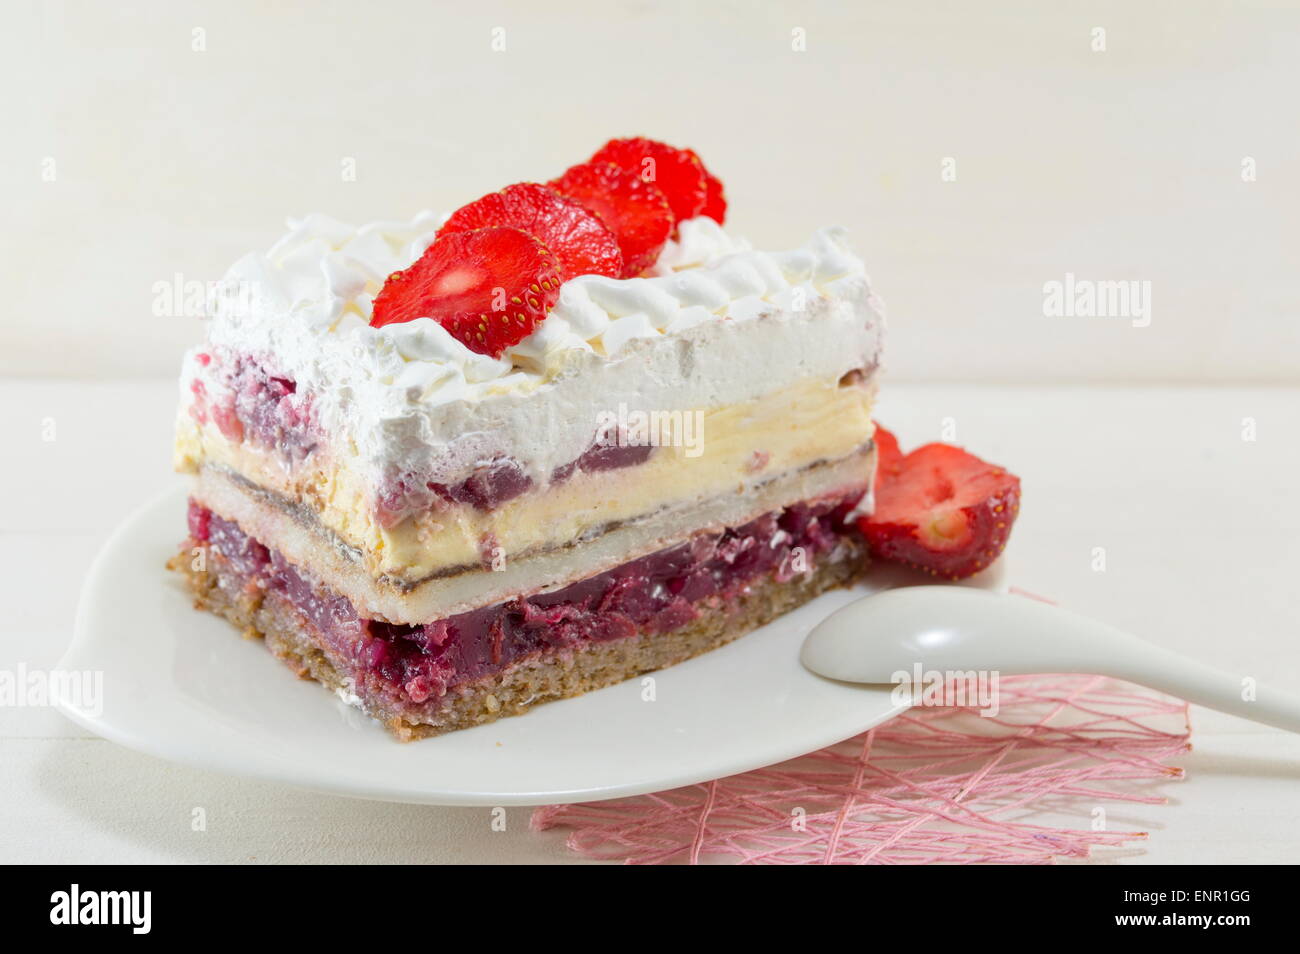 Homemade strawberry cake with whipped cream served on a plate Stock Photo